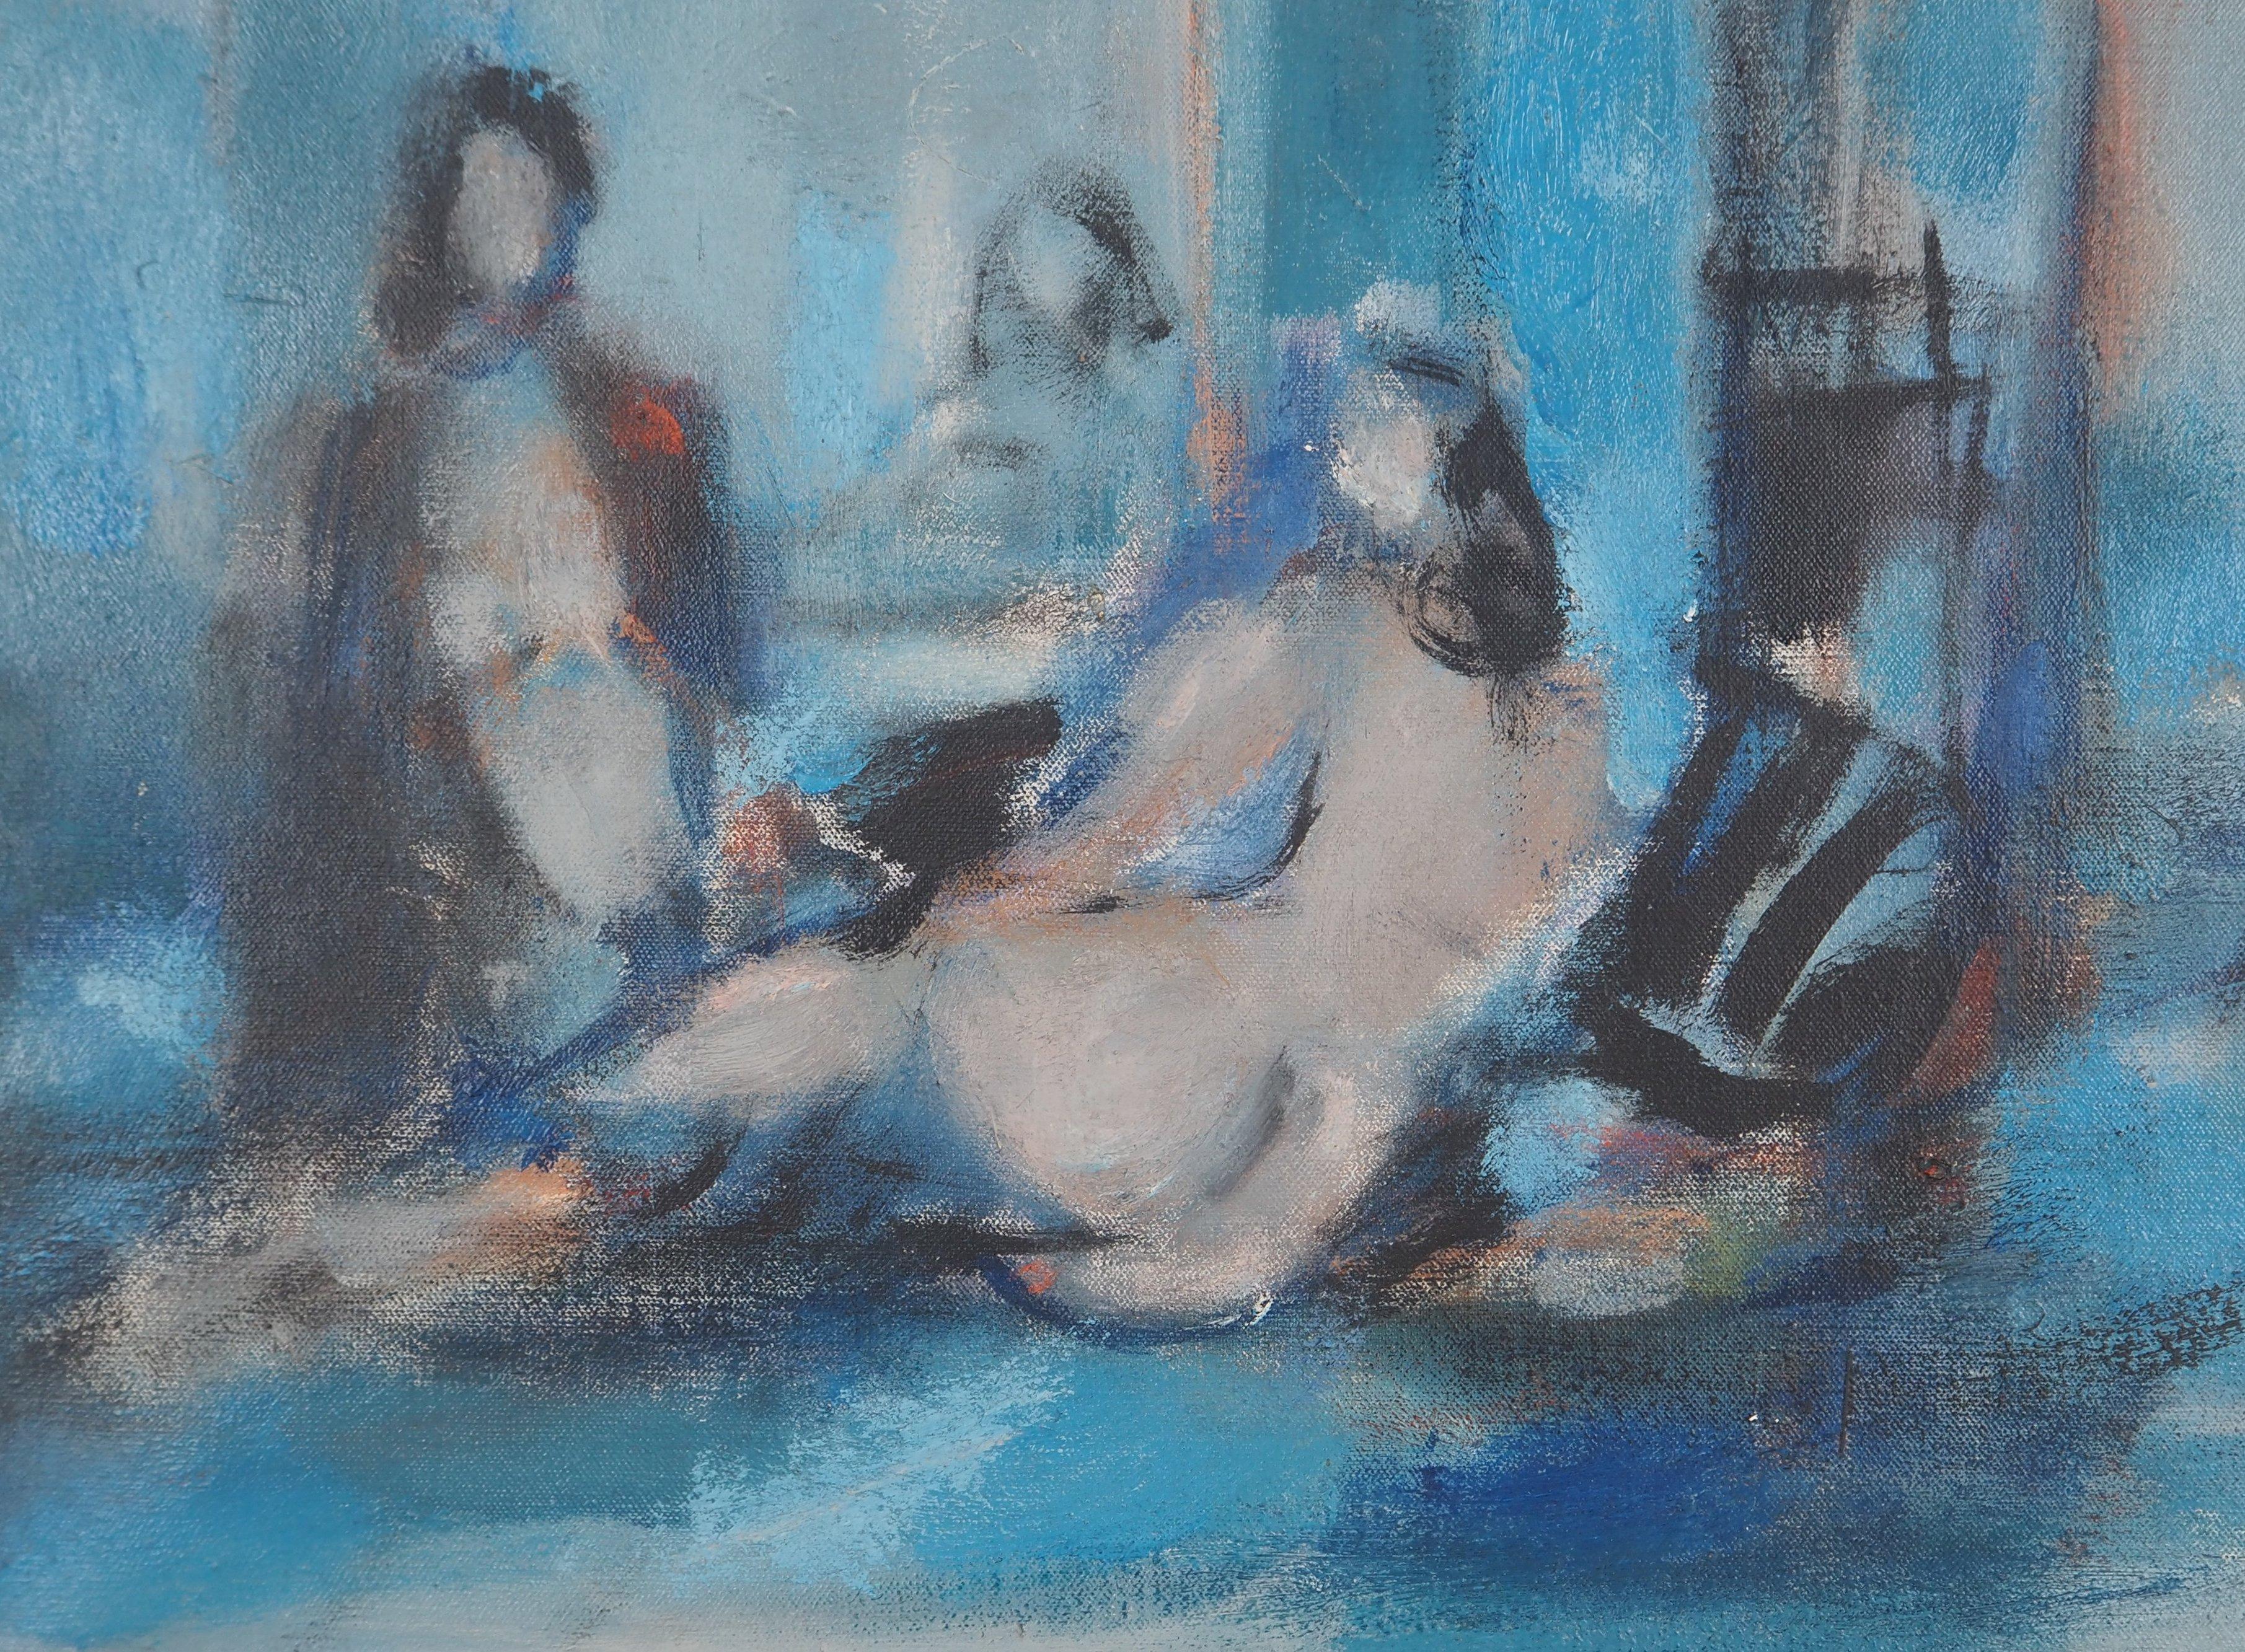 Models in a Blue Room - Original Oil on canvas, Signed - Painting by Marcel Mouly